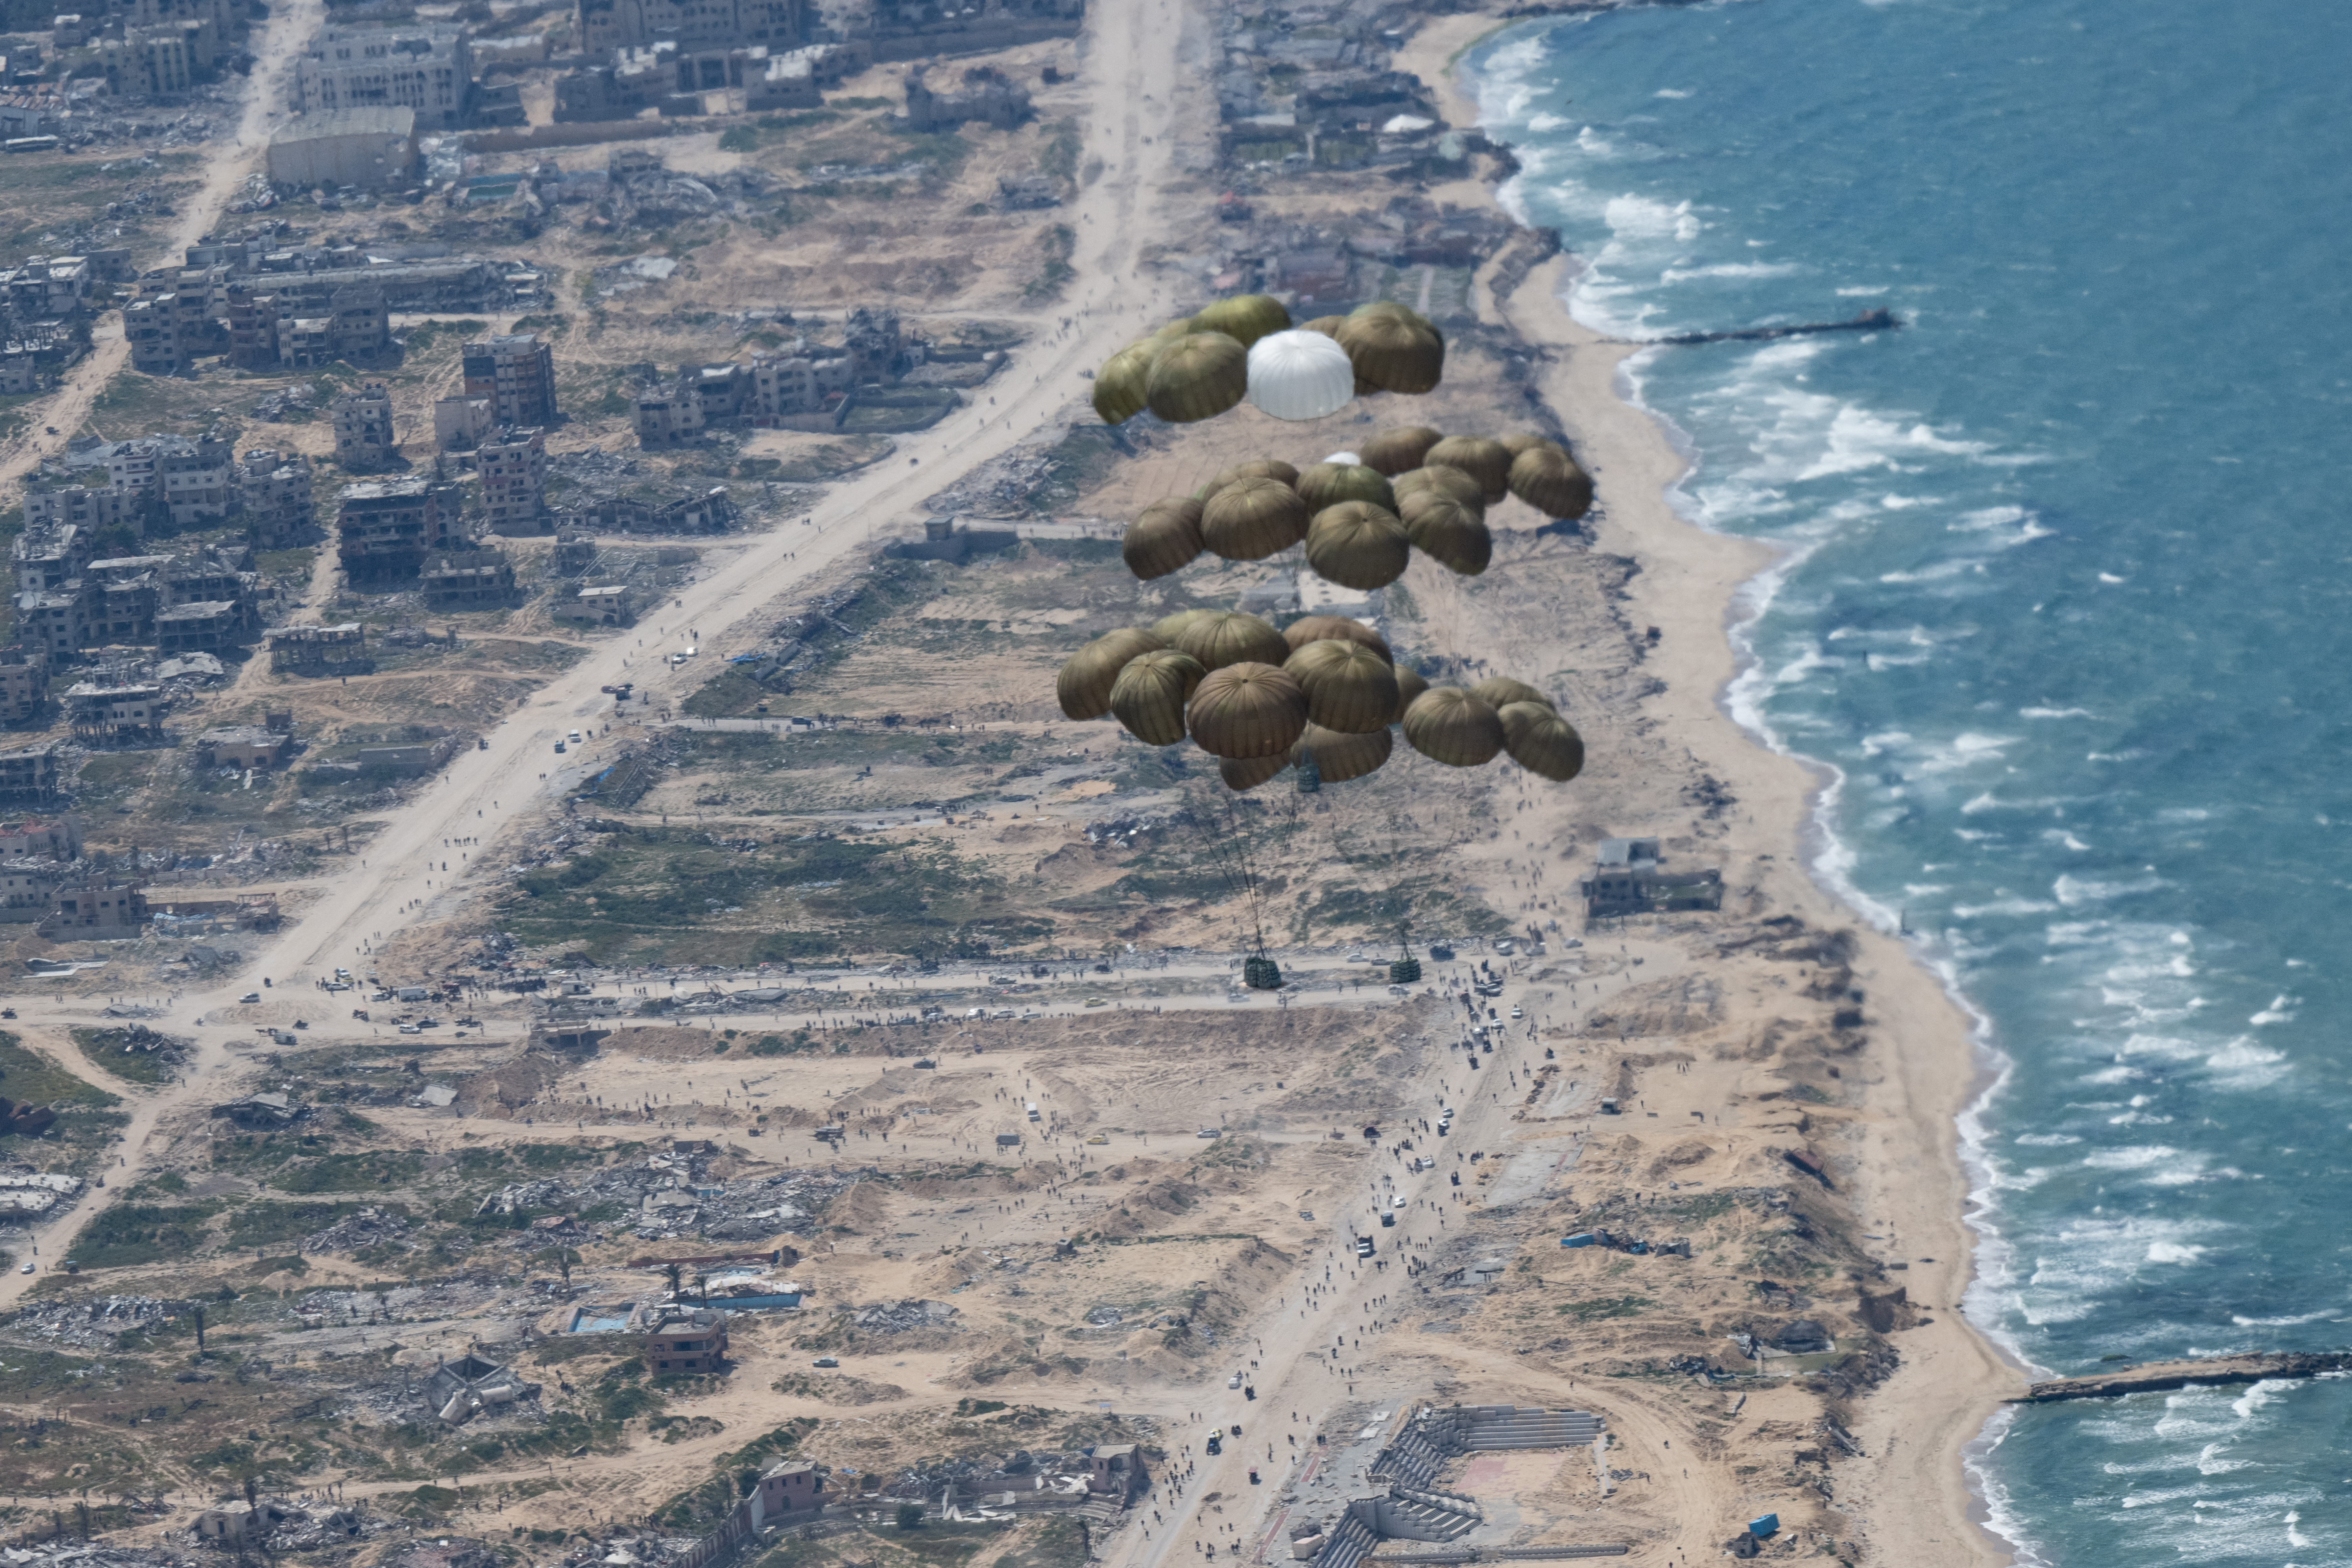 Parachutes with relief supplies float over the Gaza Strip